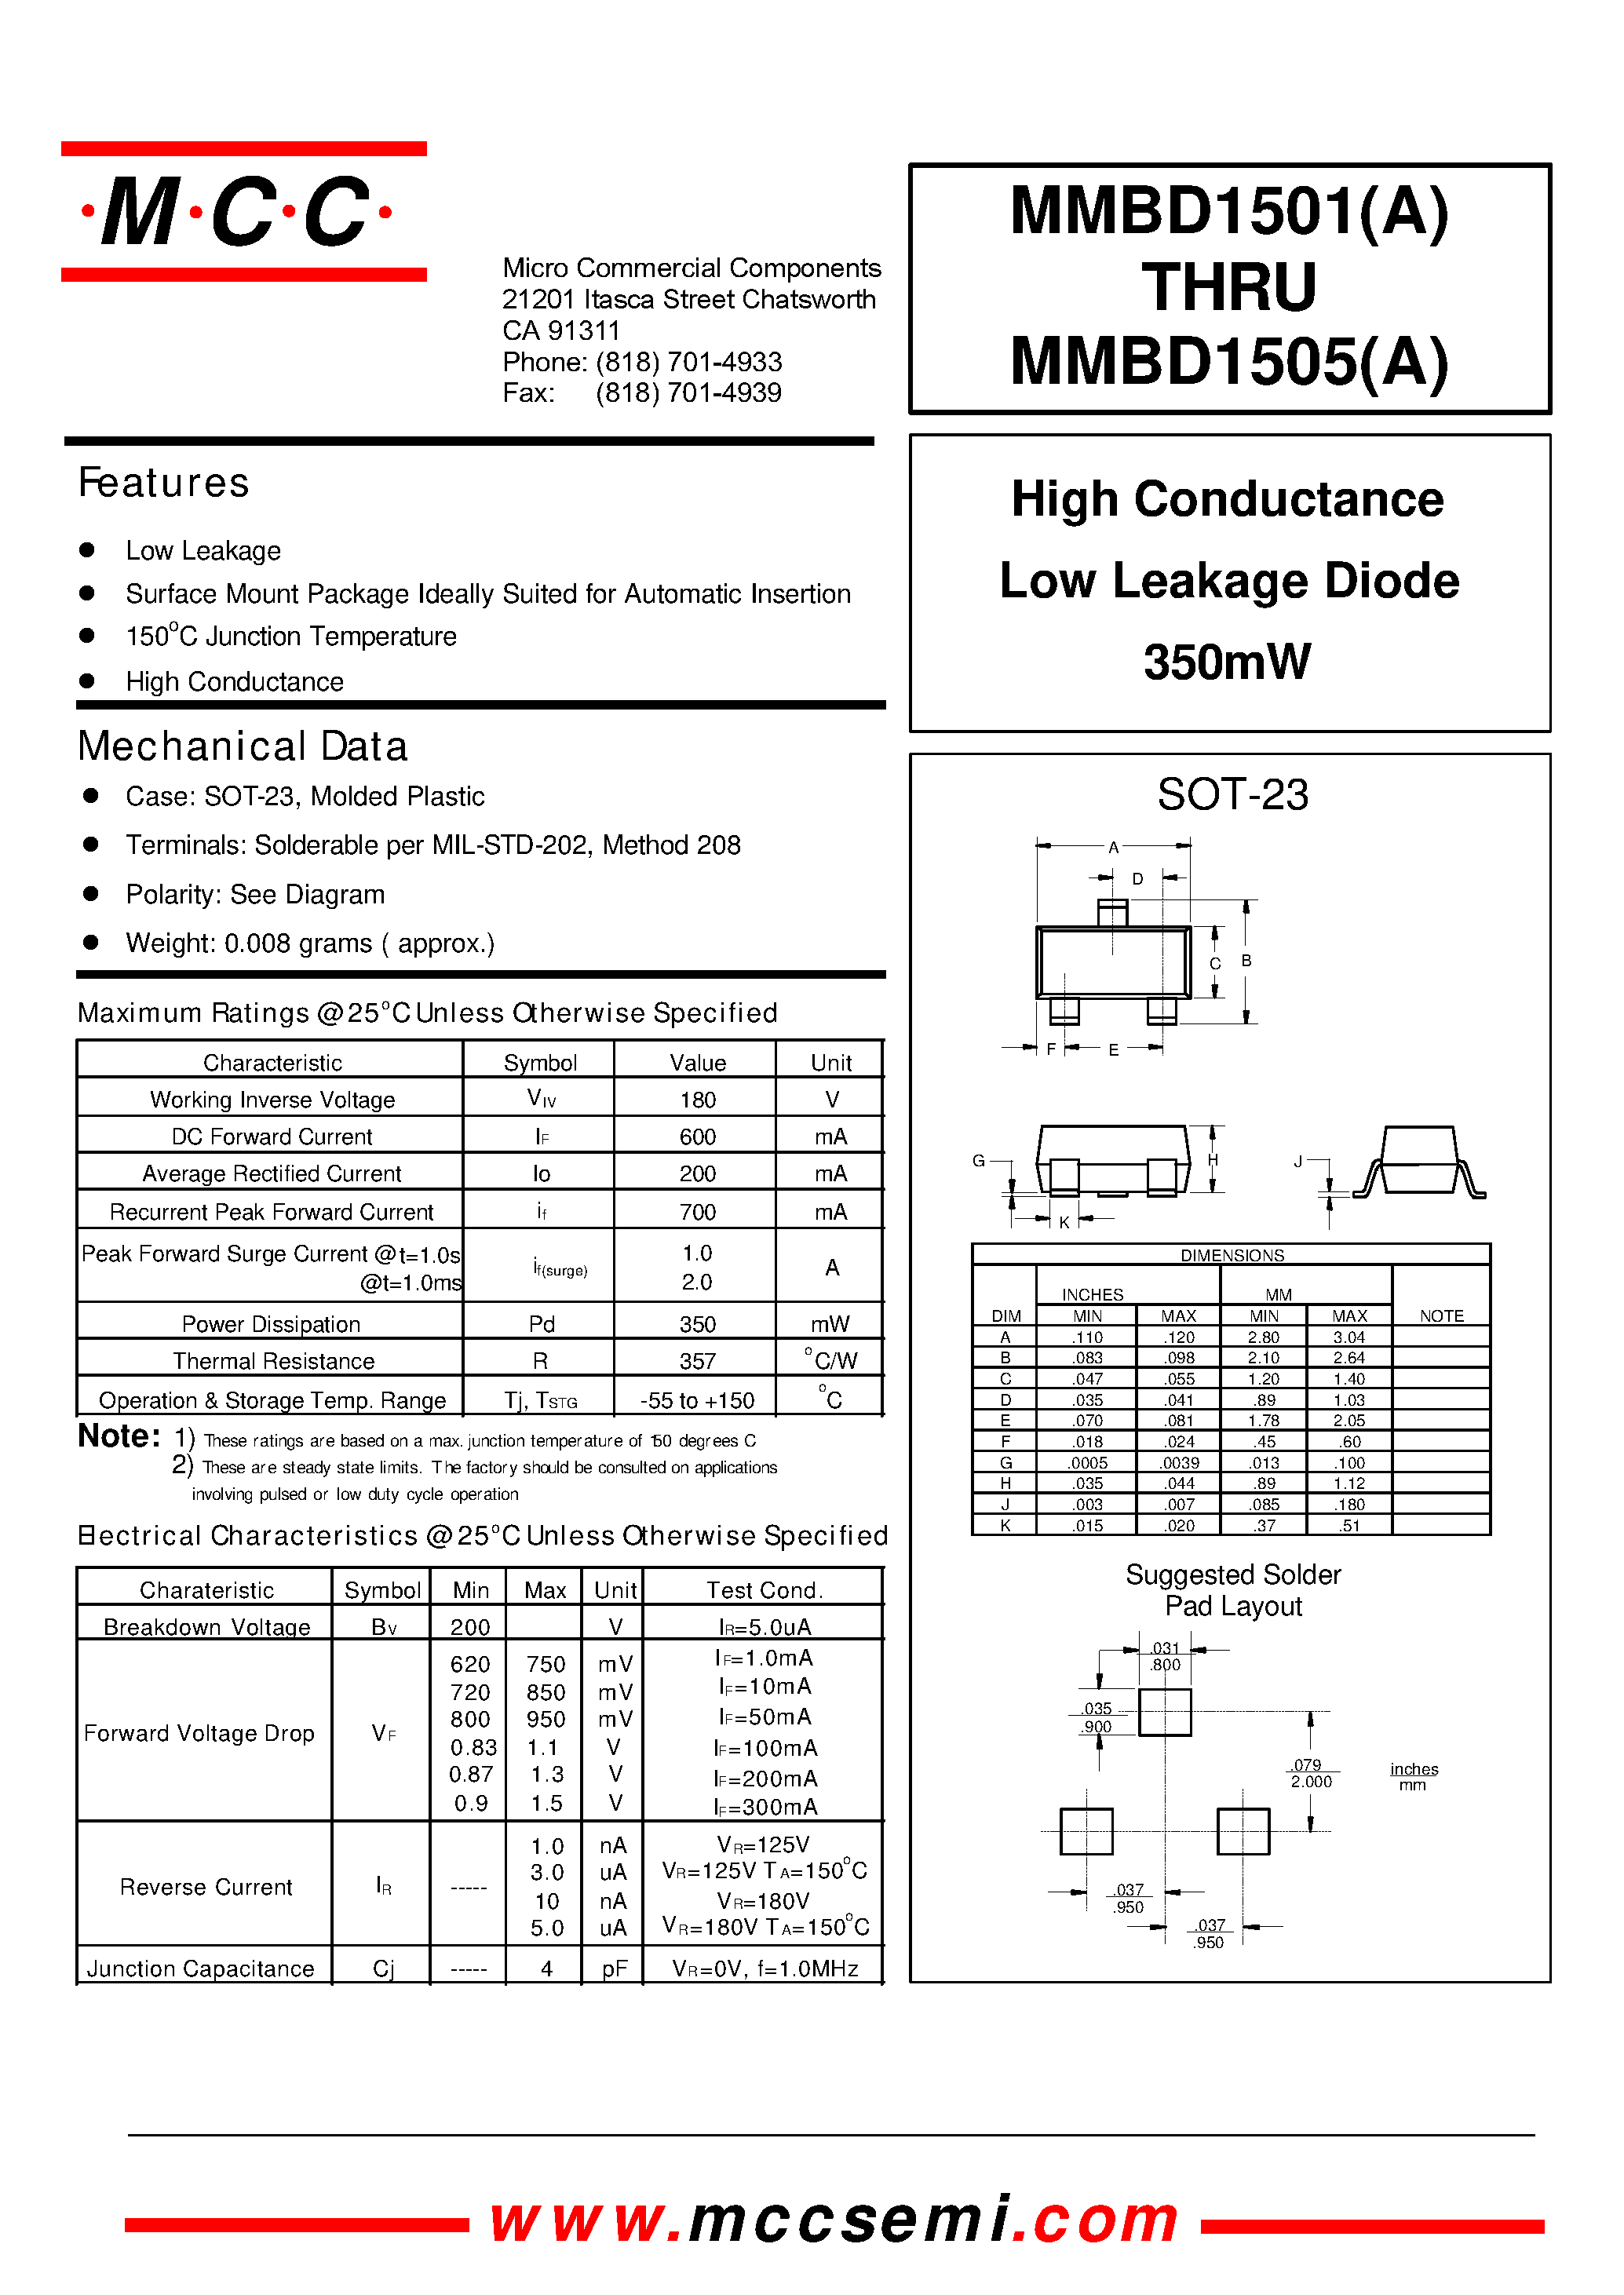 Datasheet MMBD1503 - High Conductance Low Leakage Diode 350mW page 1